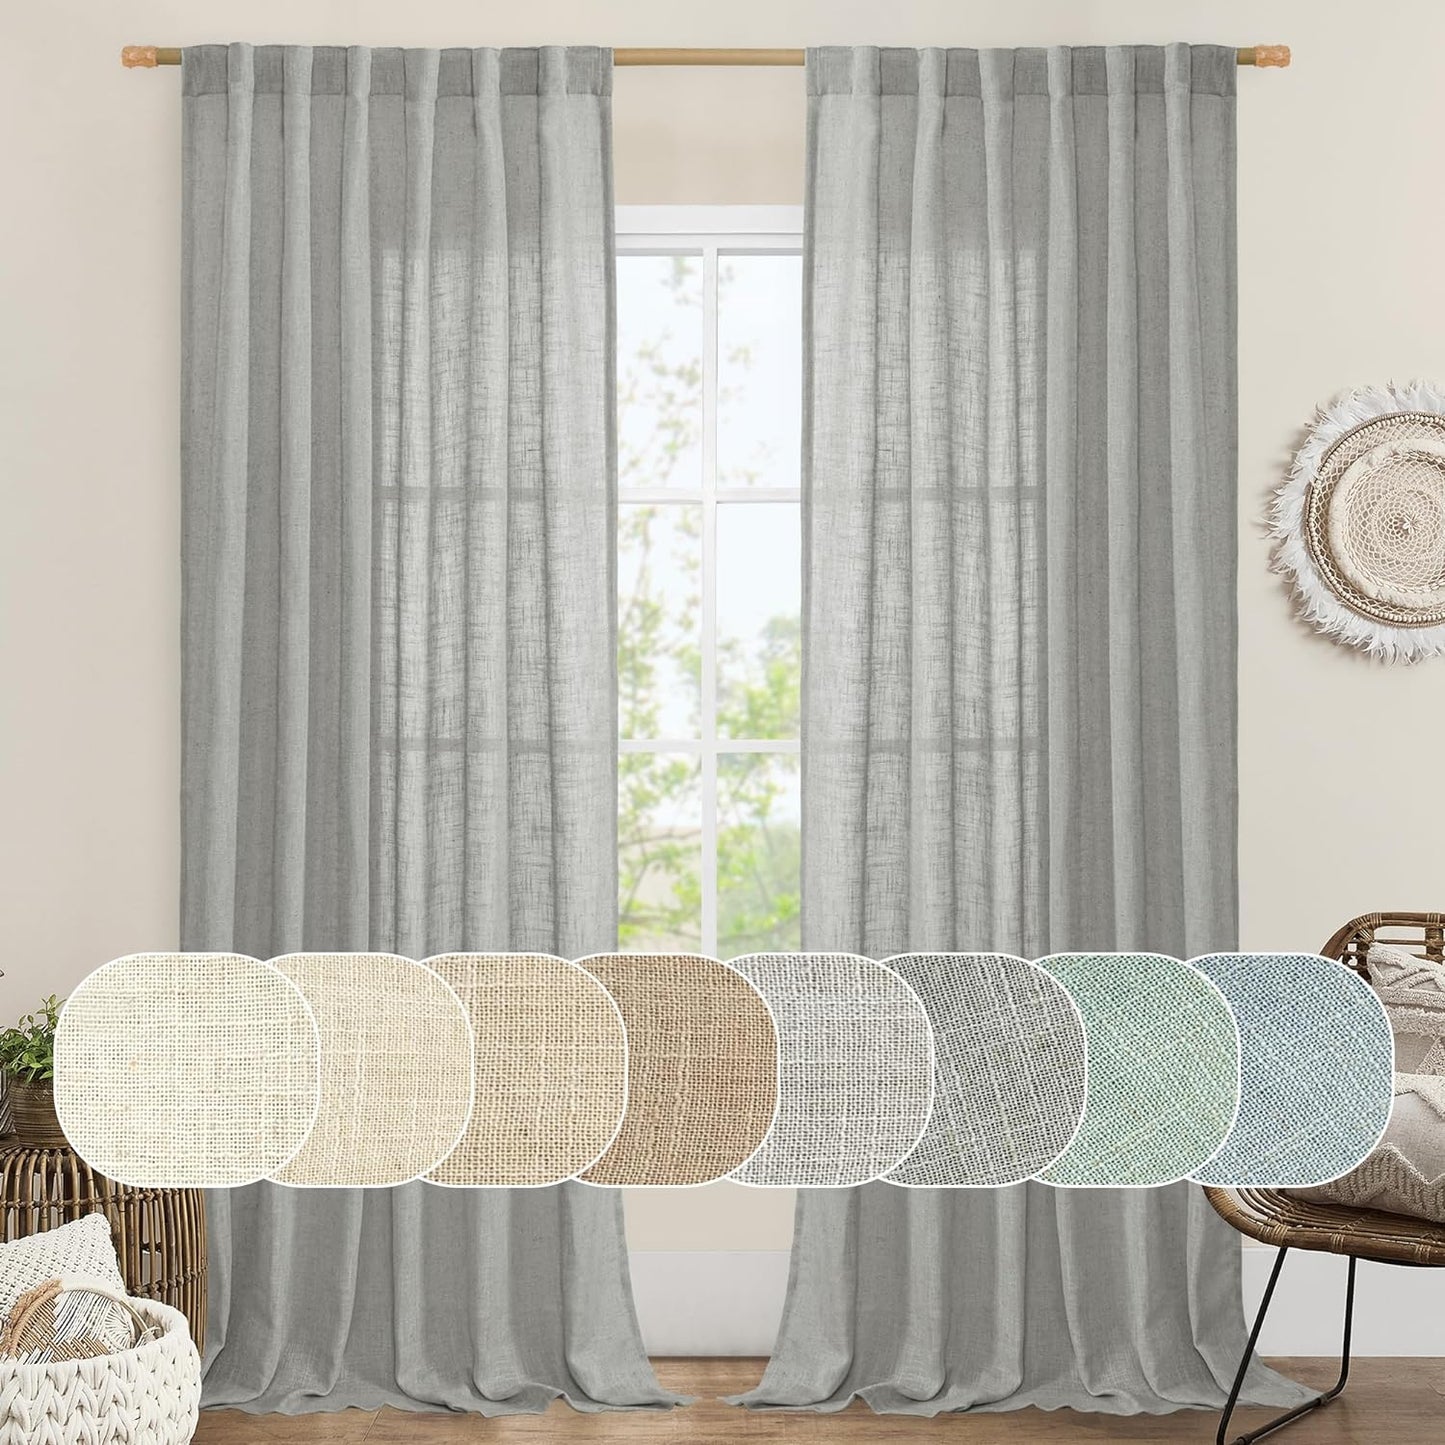 LAMIT Natural Linen Blended Curtains for Living Room, Back Tab and Rod Pocket Semi Sheer Curtains Light Filtering Country Rustic Drapes for Bedroom/Farmhouse, 2 Panels,52 X 108 Inch, Linen  LAMIT Grey 52W X 95L 